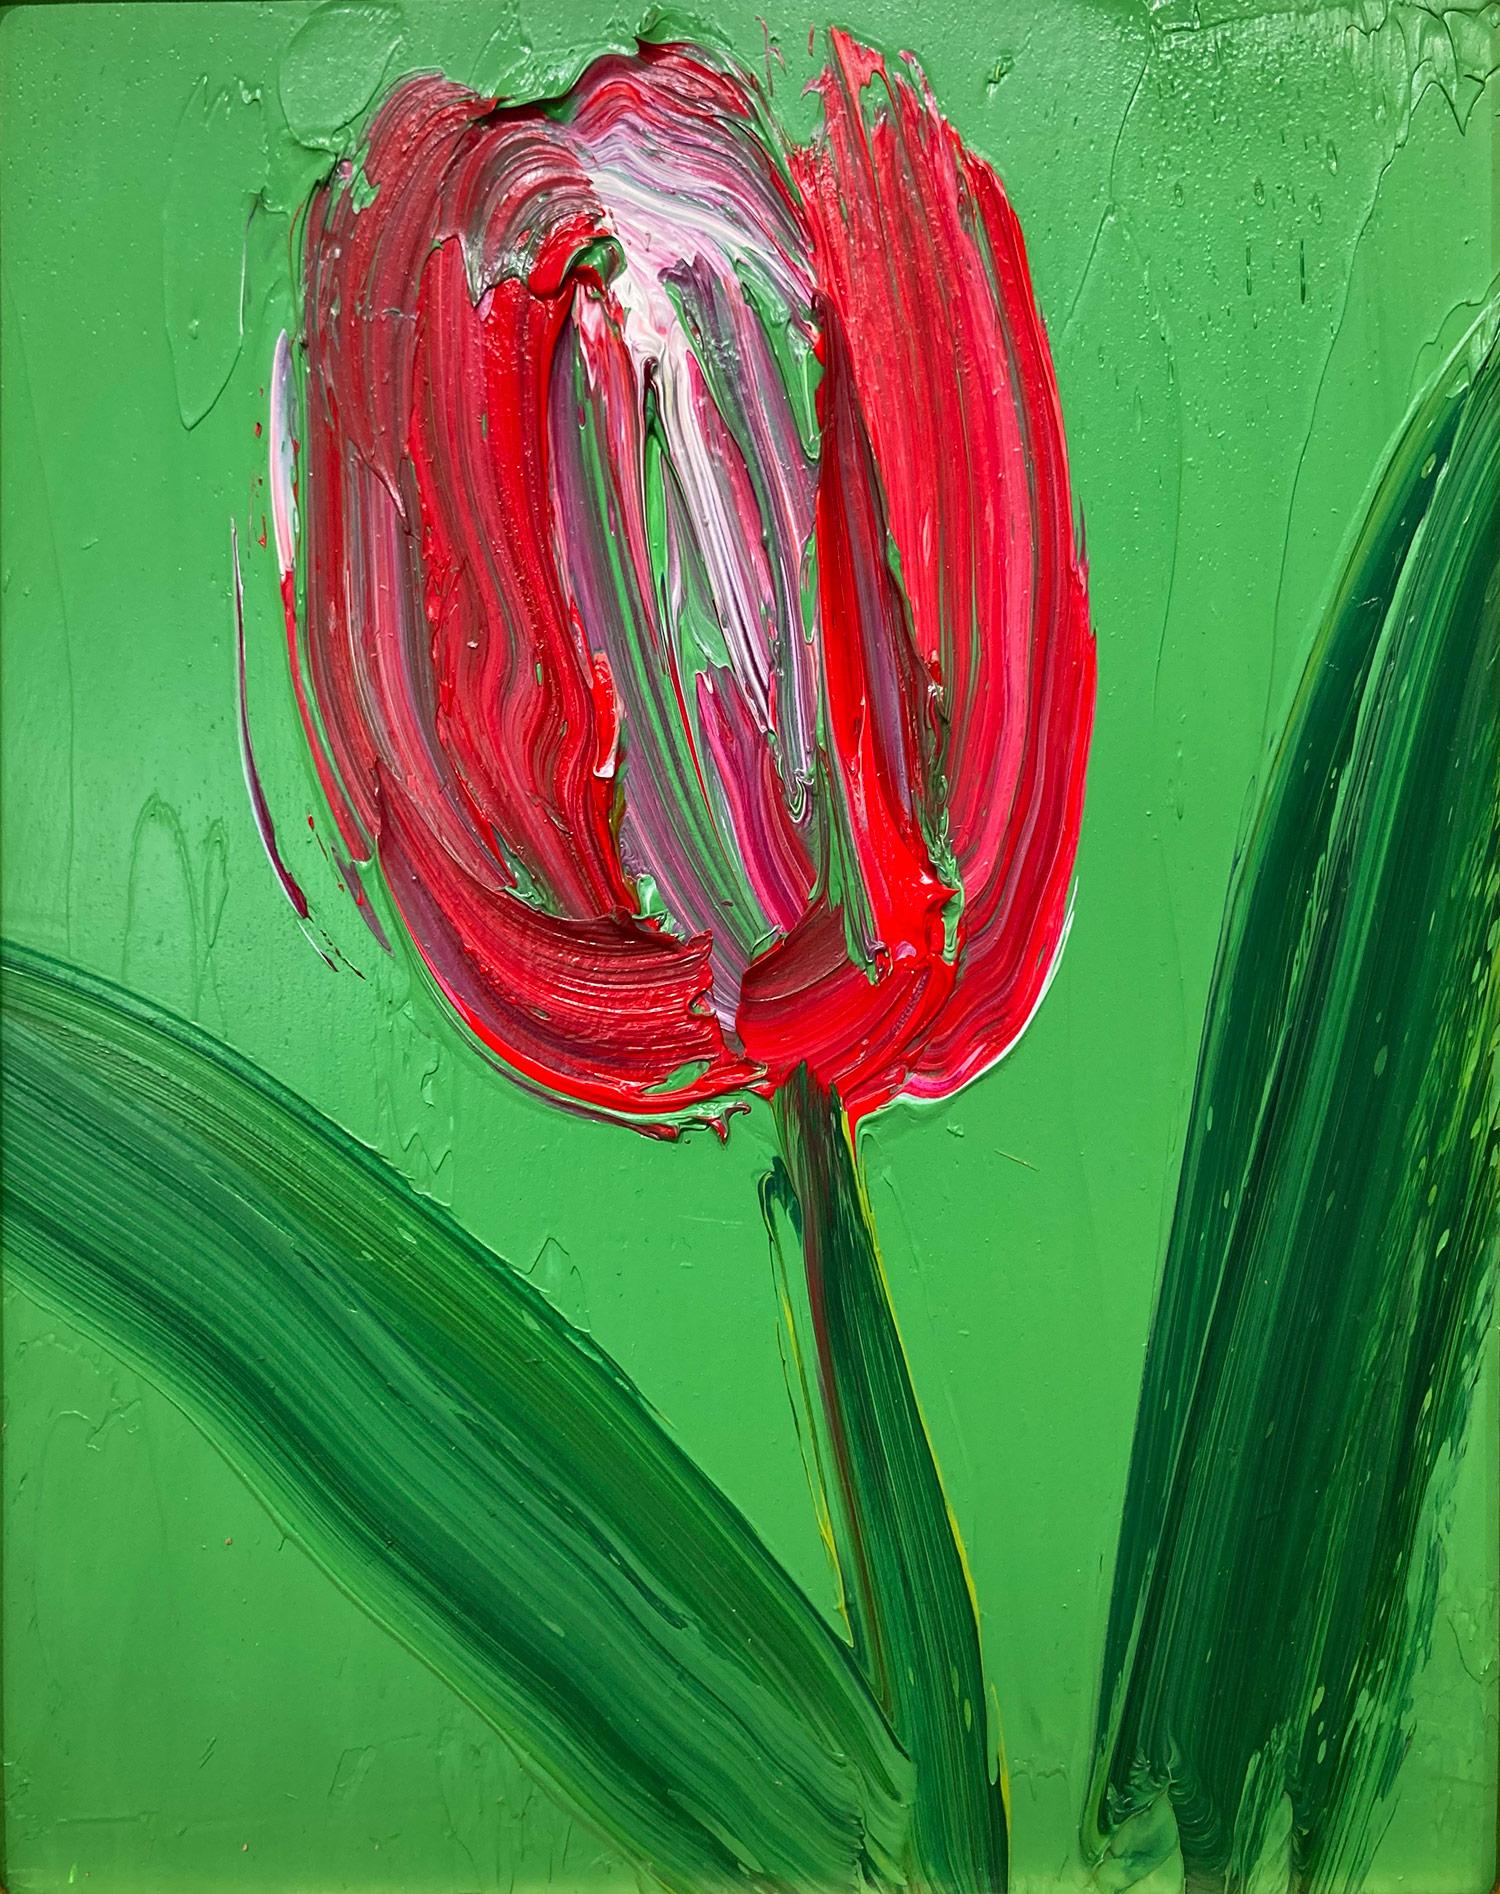 A wonderful composition of one of Slonem's newest series, Tulips. This piece depicts gestural figure of a red and white Tulip on a forest green background with thick use of paint. Inspired by nature and a genuine love for animals, Slonem's paintings